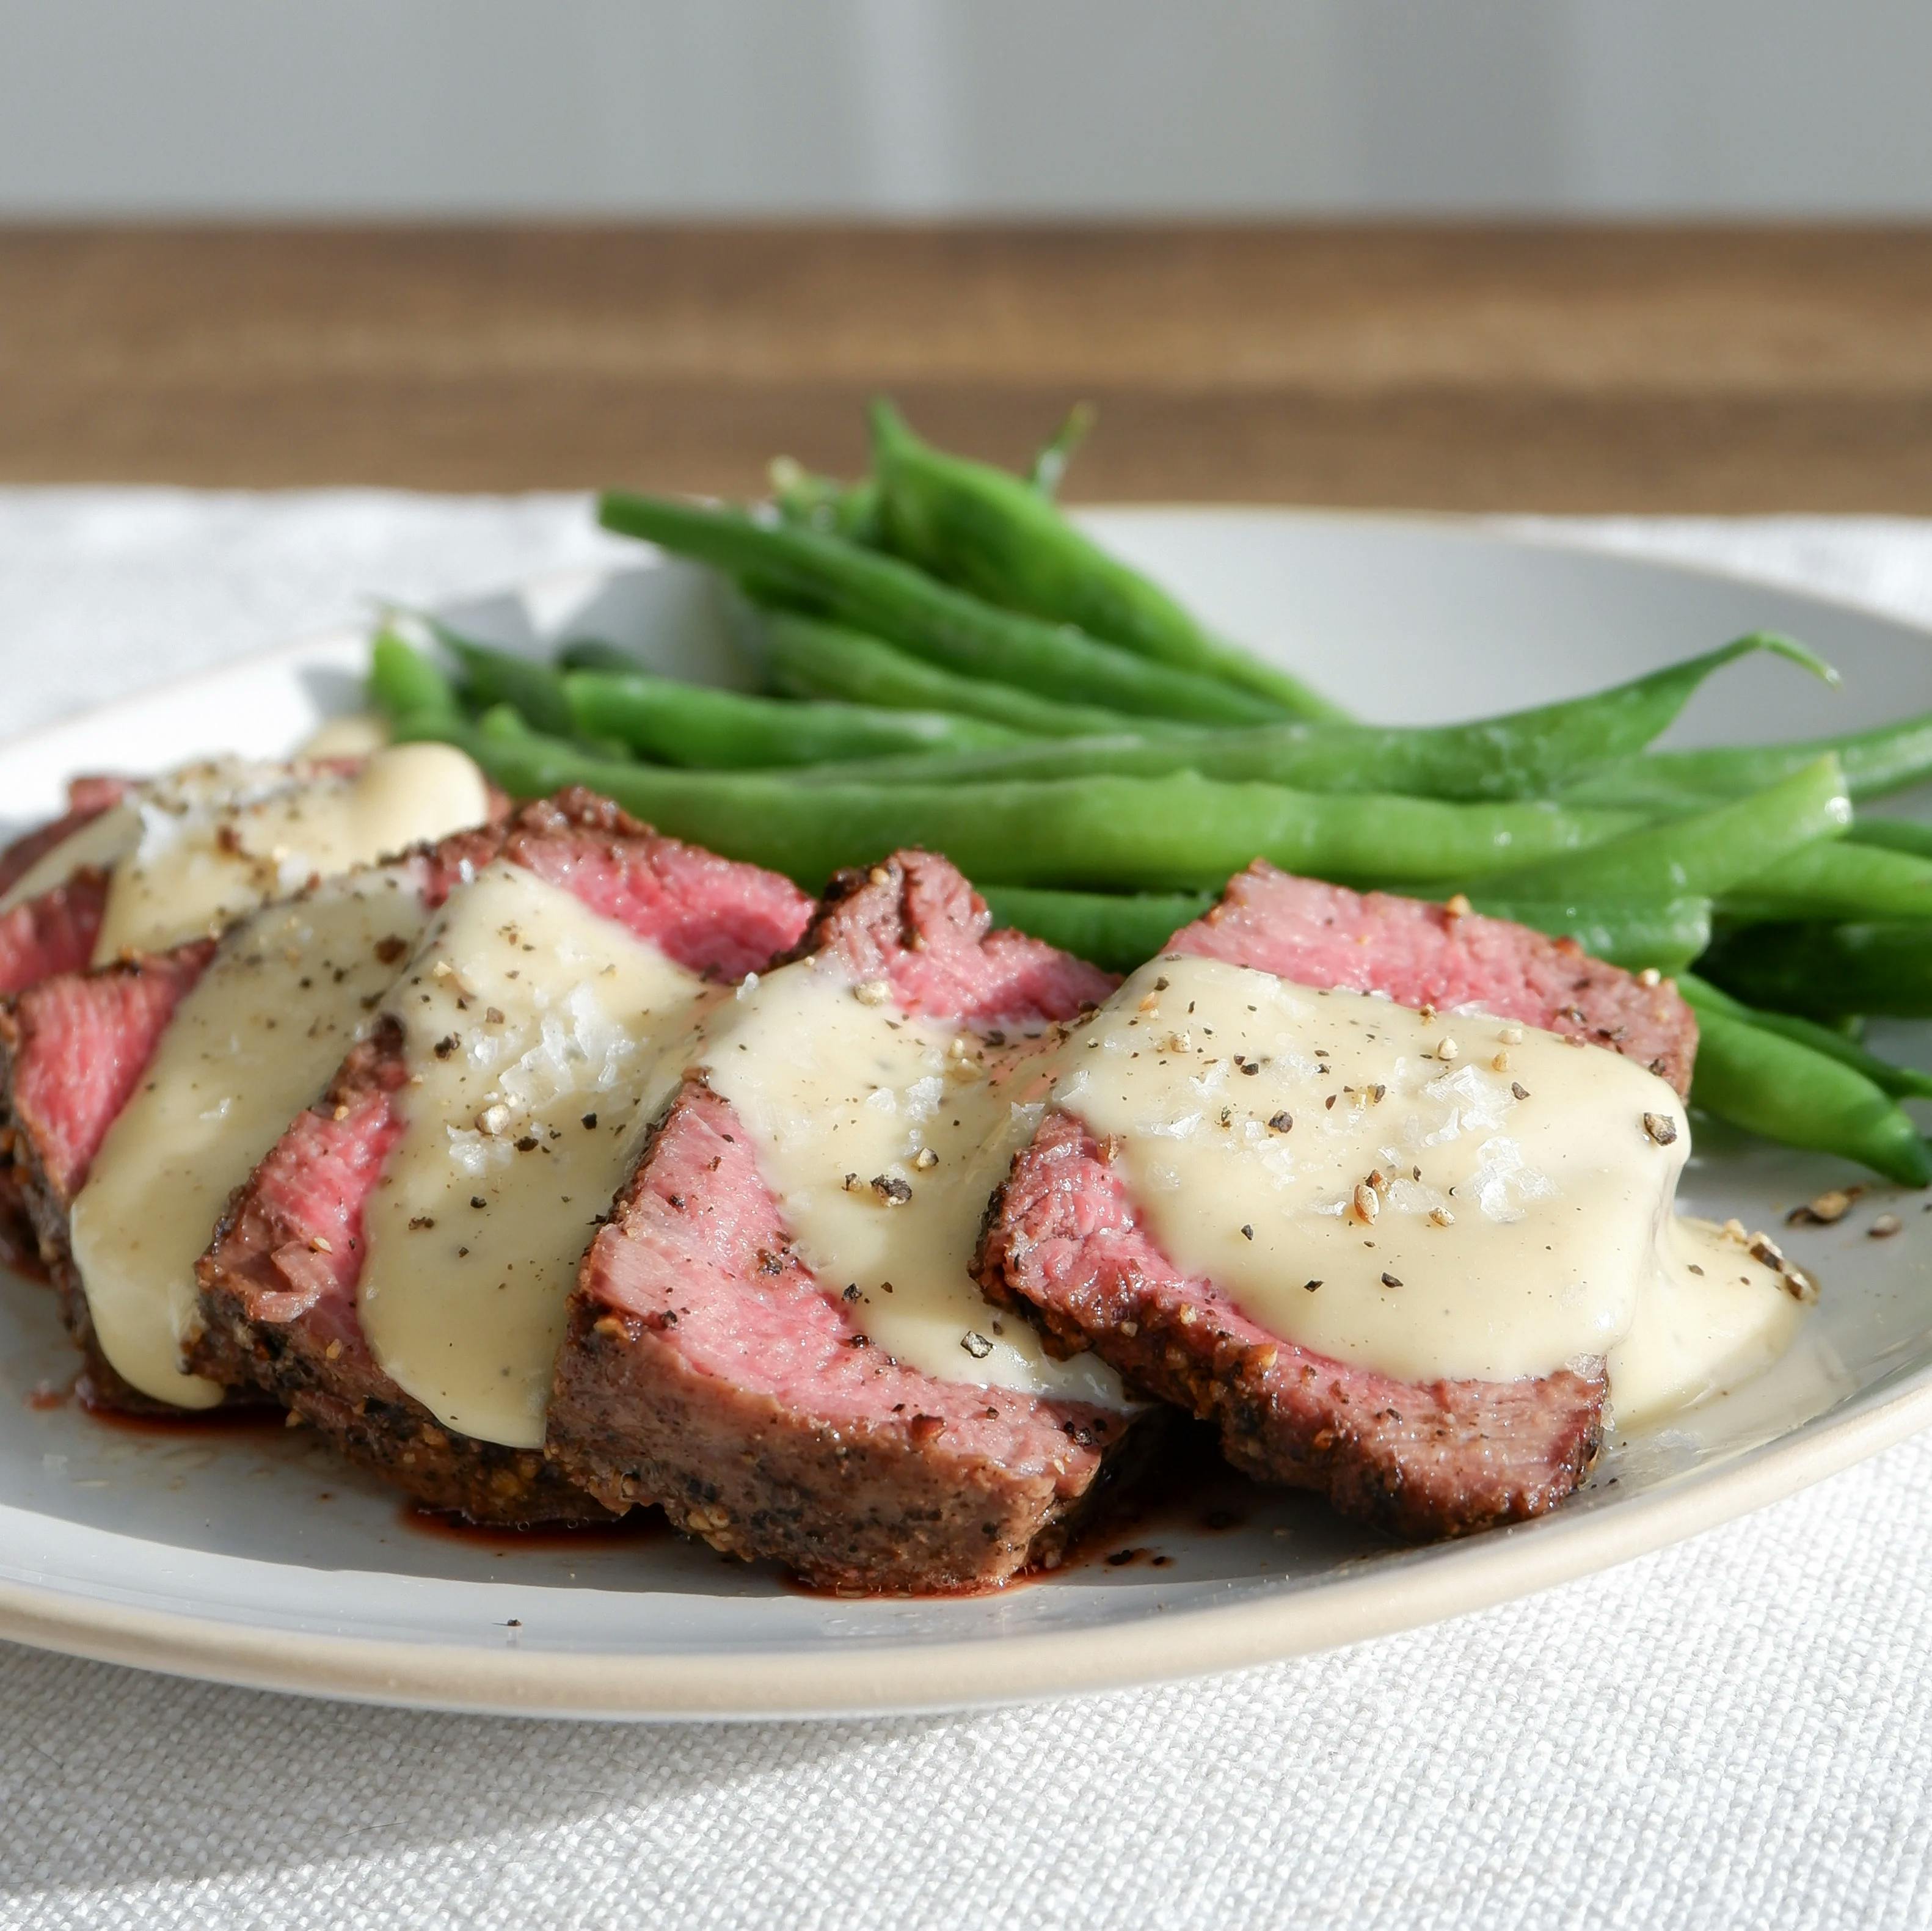 Picture for Filet with Creamy Rosemary Sauce